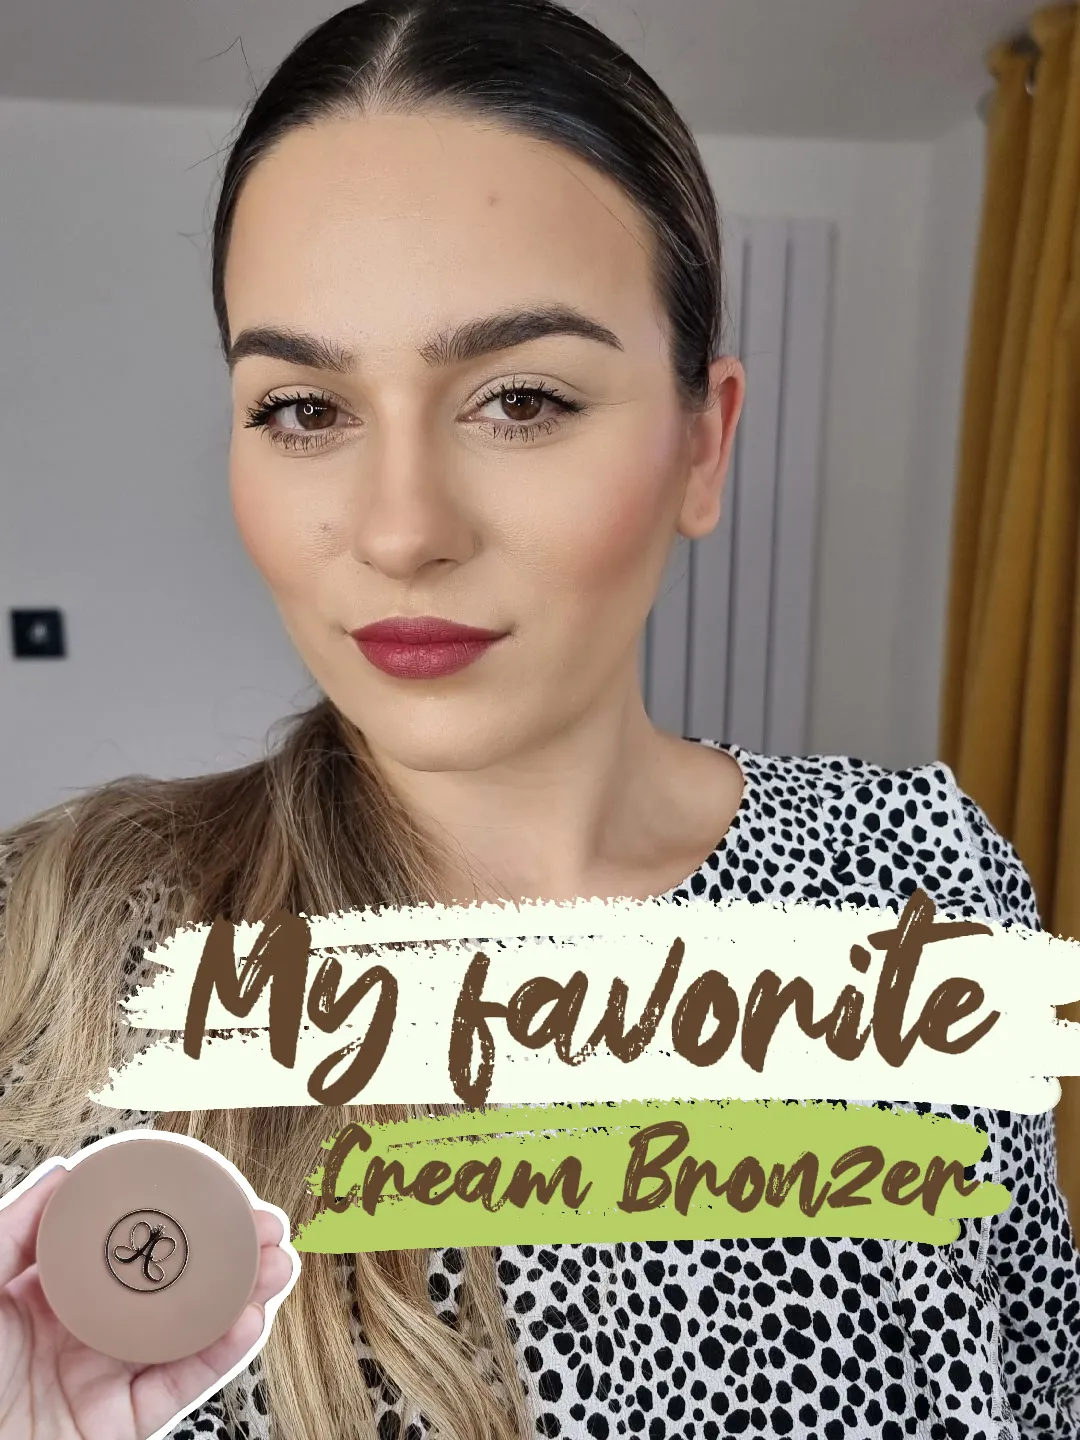 Chanel bronzer review  Les Beiges Healthy Glow Bronzing Cream - Opposable  Thumbs